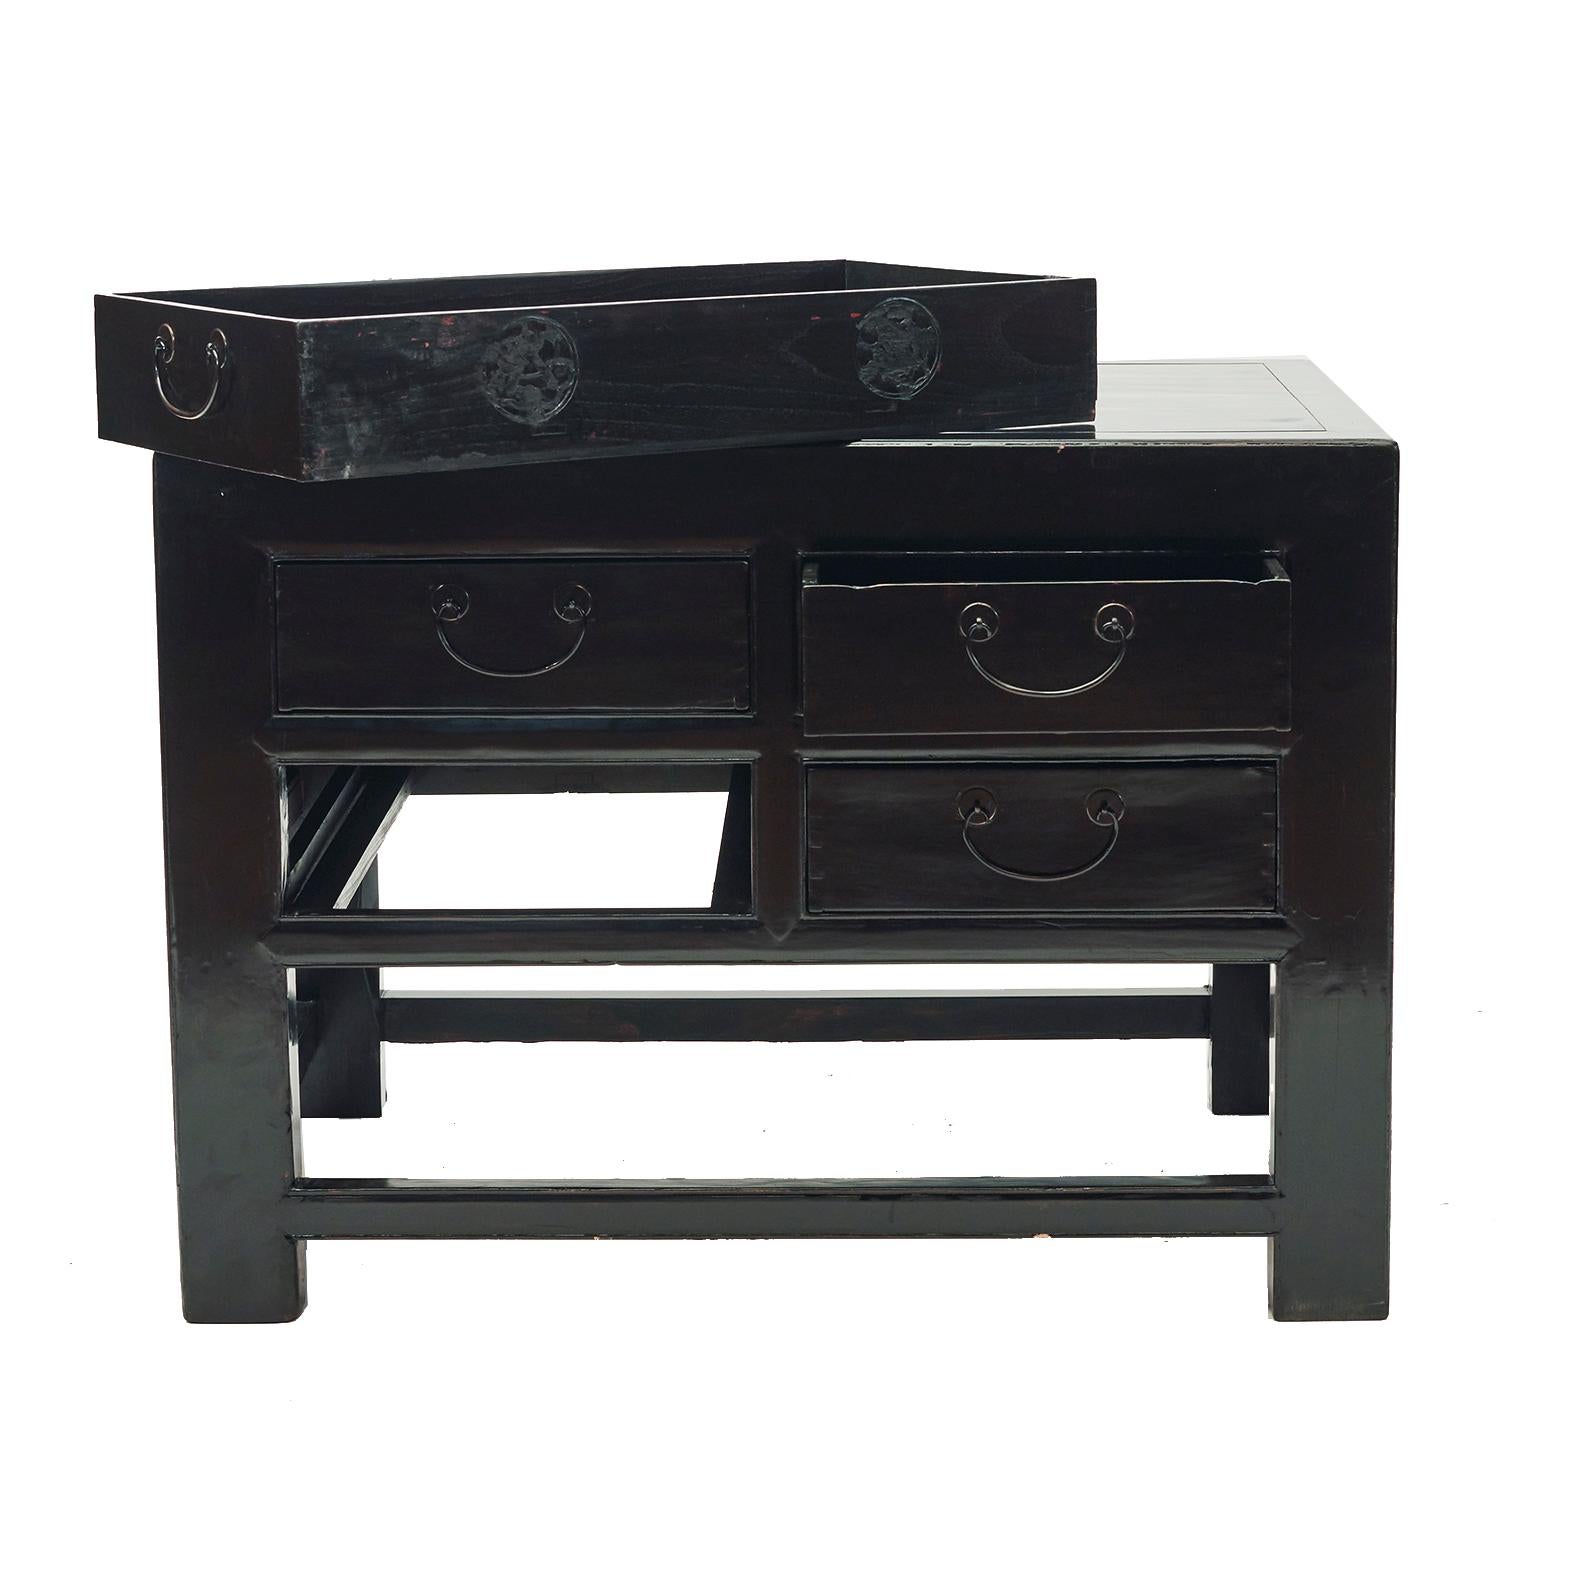 Chinese Black Lacquer Freestanding Art Deco Center Table For Sale